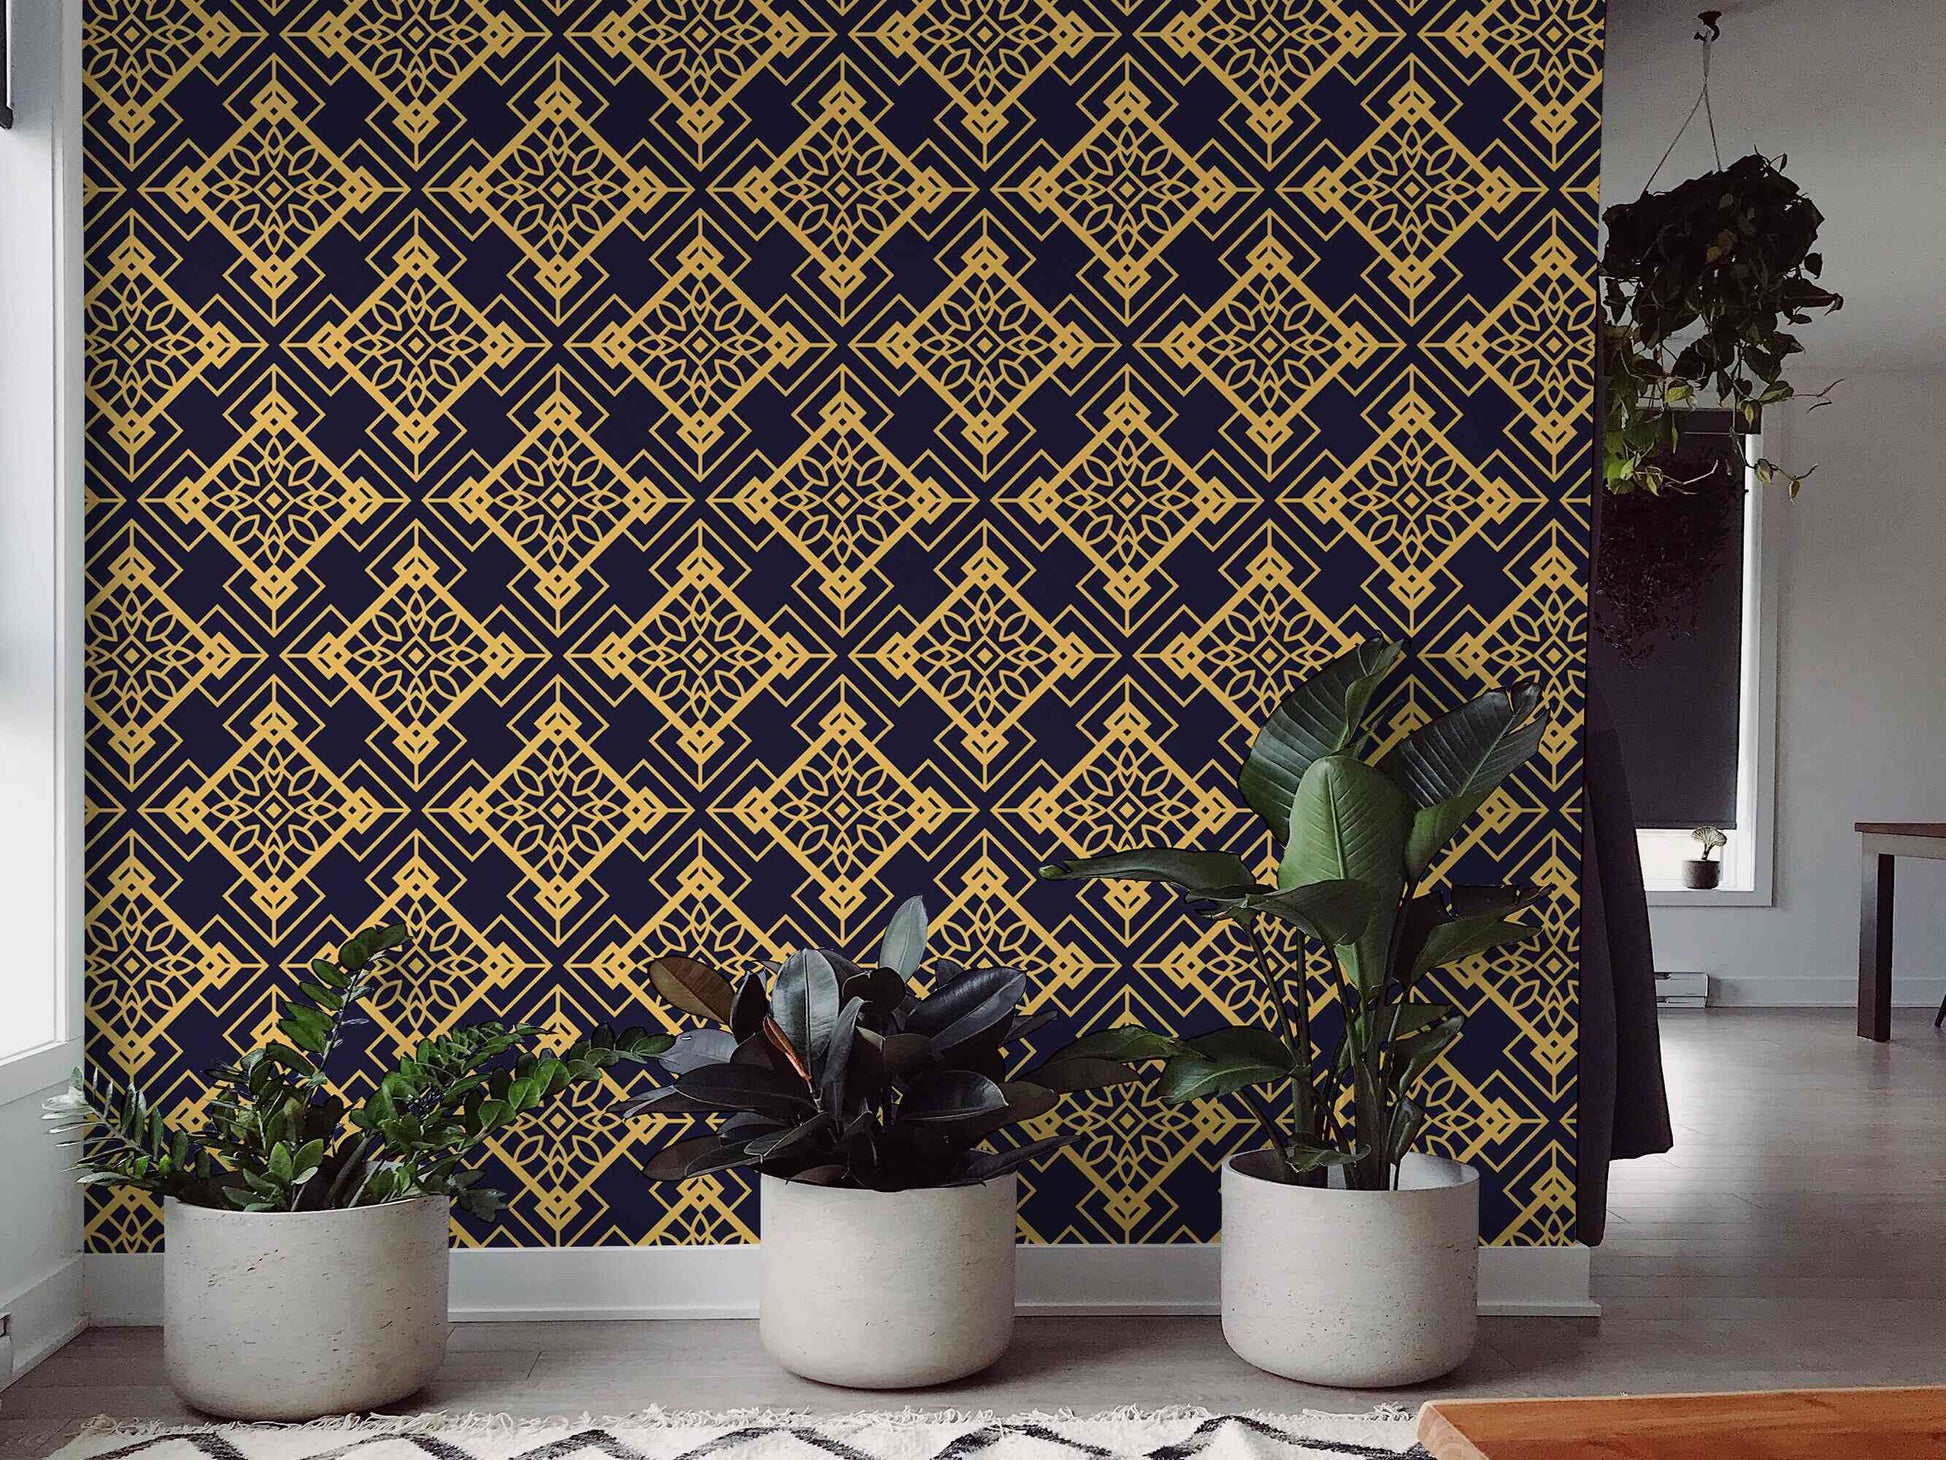 Luxury pattern home wall design, perfect for a refined look.